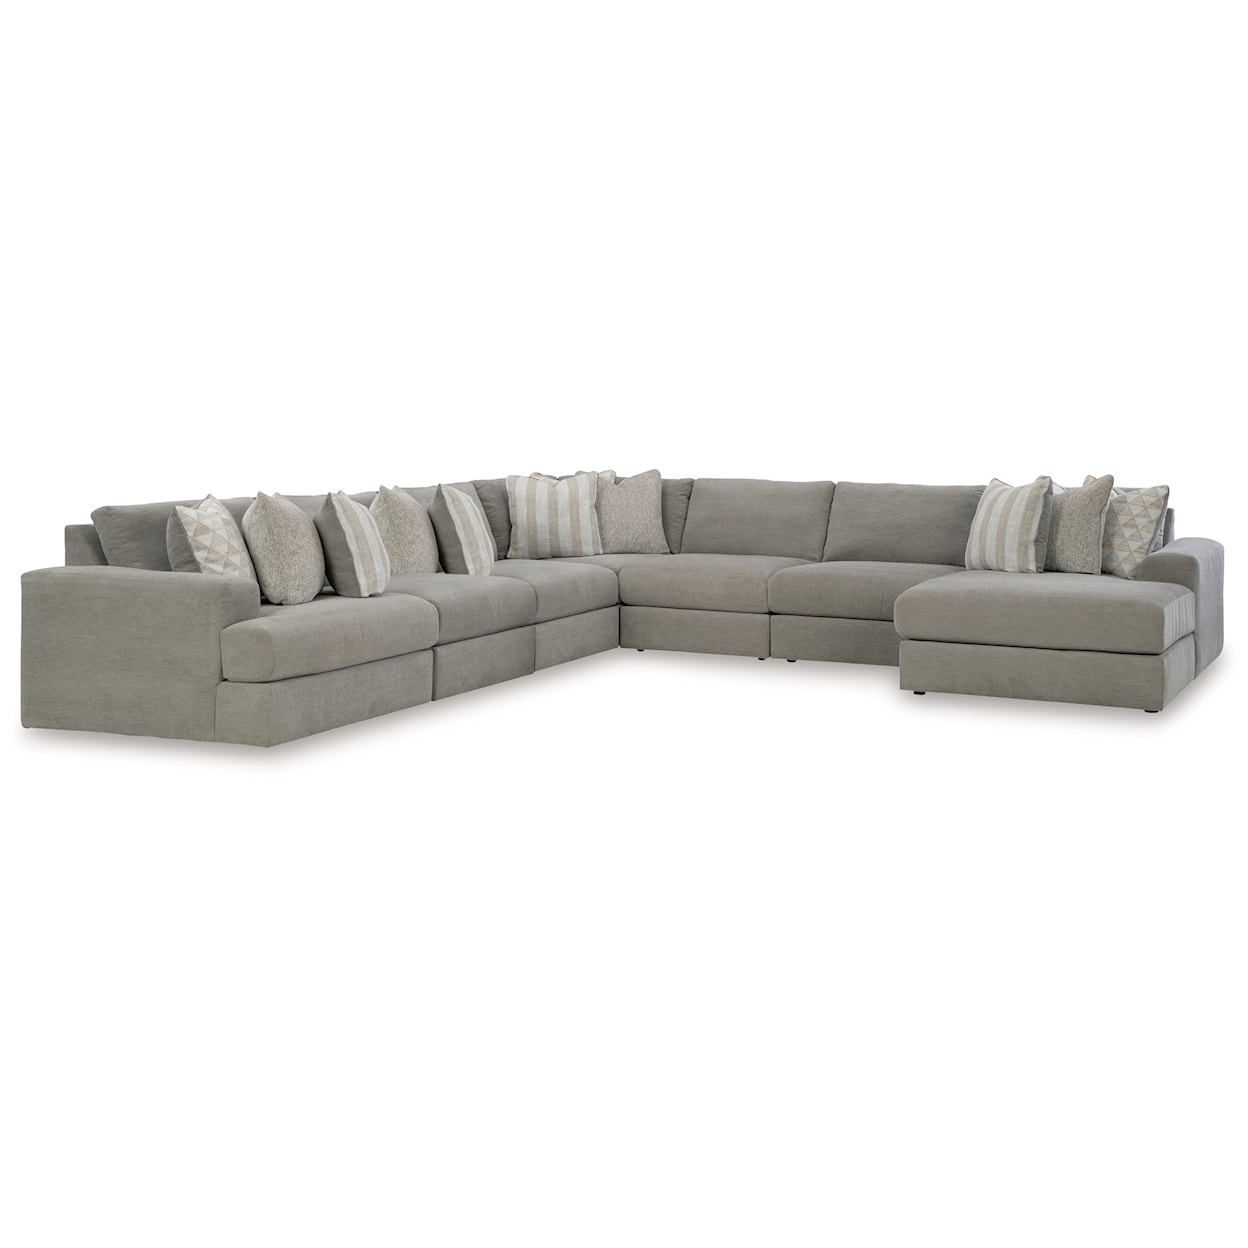 Michael Alan Select Avaliyah 7-Piece Sectional With Chaise